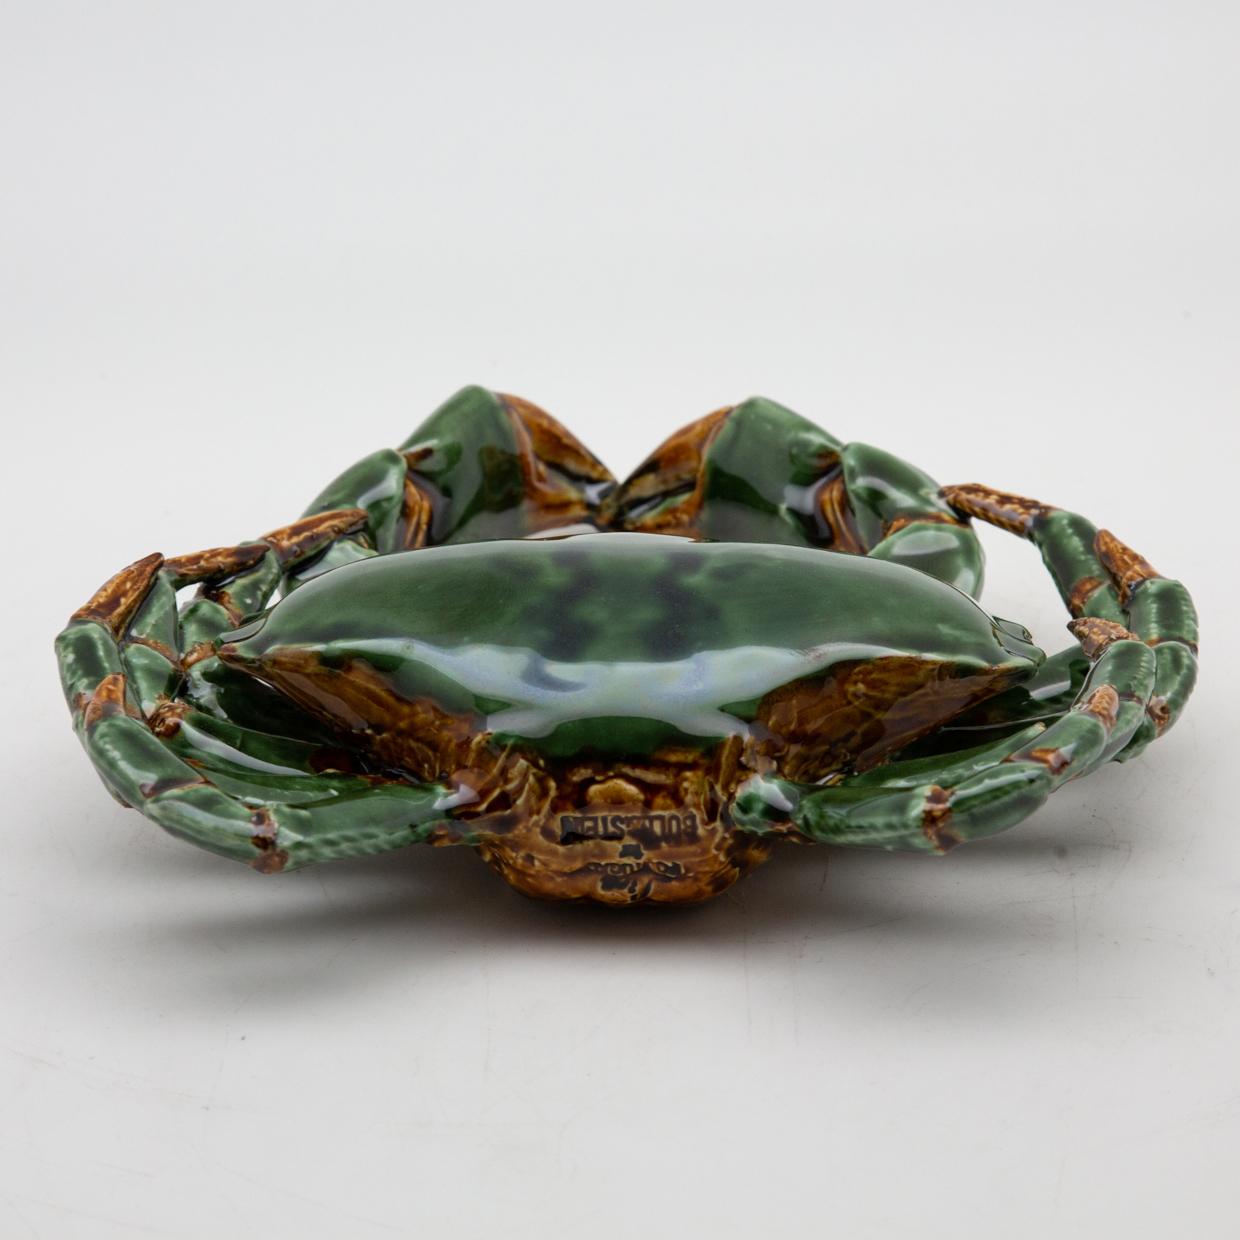 Portuguese handmade Pallissy or Majolica green ceramic crab

Ceramic sea life art has long been a tradition in Portugal. It was inspired by the 